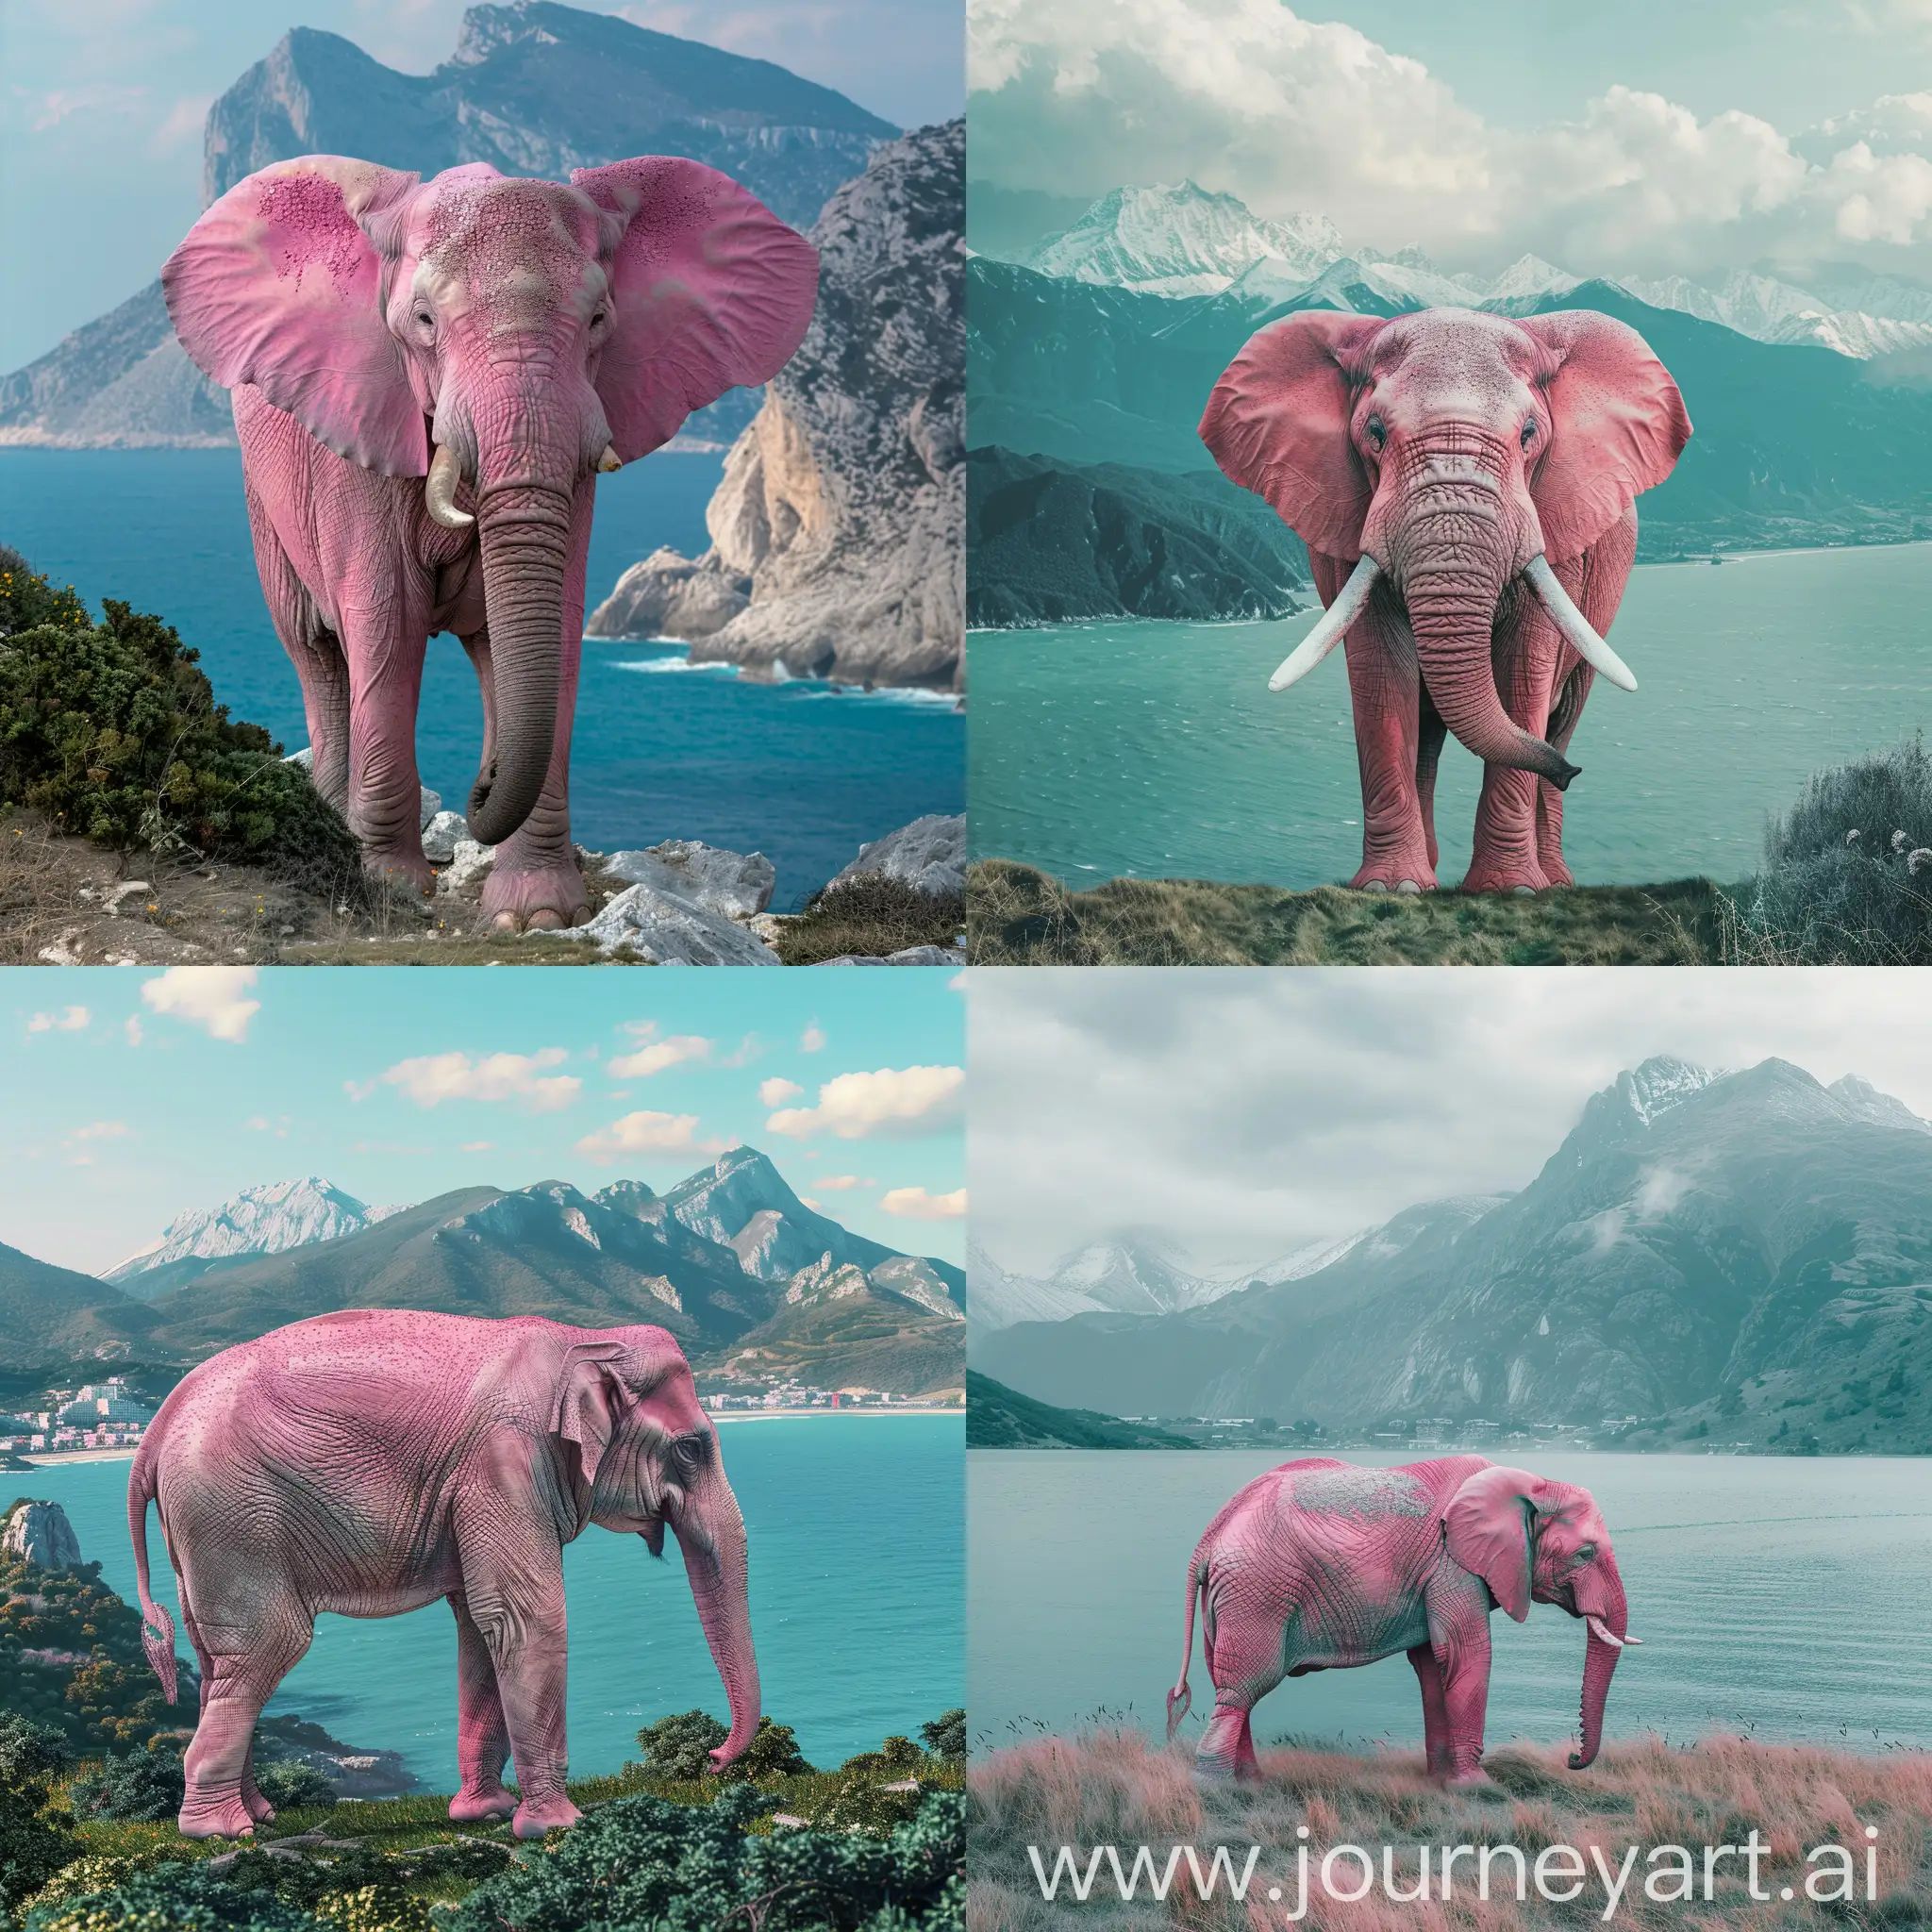 generate for me an elephant that is pink in the background there are mountains and the sea